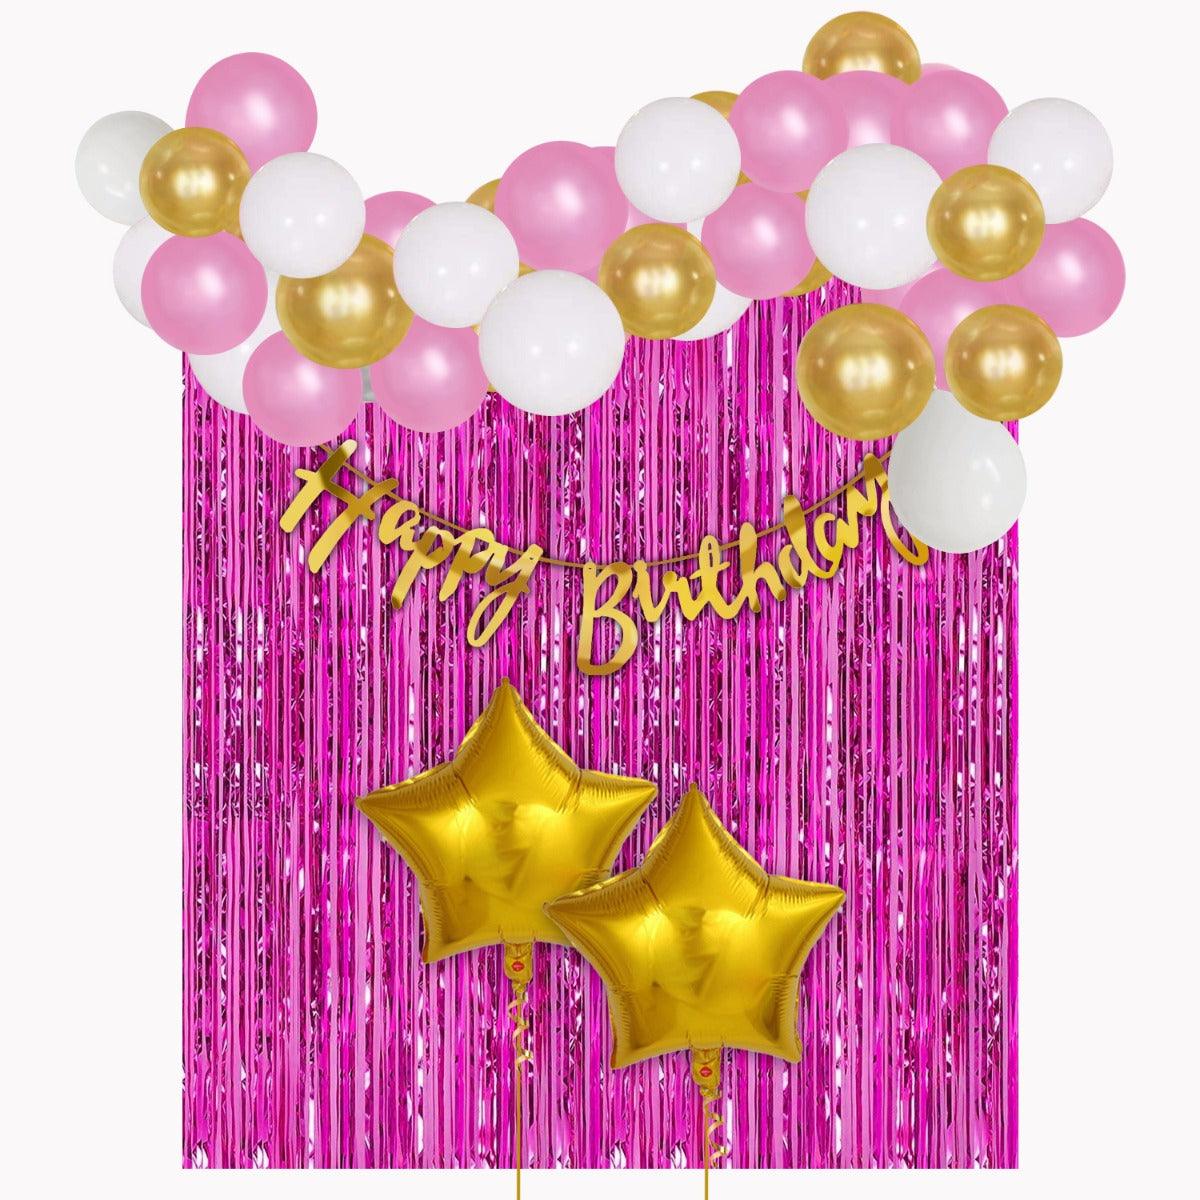 PartyCorp Happy Birthday Decoration Kit Combo 38 Pcs - Gold, Pink & White Latex Balloon, Gold Happy Birthday Banner, Pink Curtain, Gold Star Foil